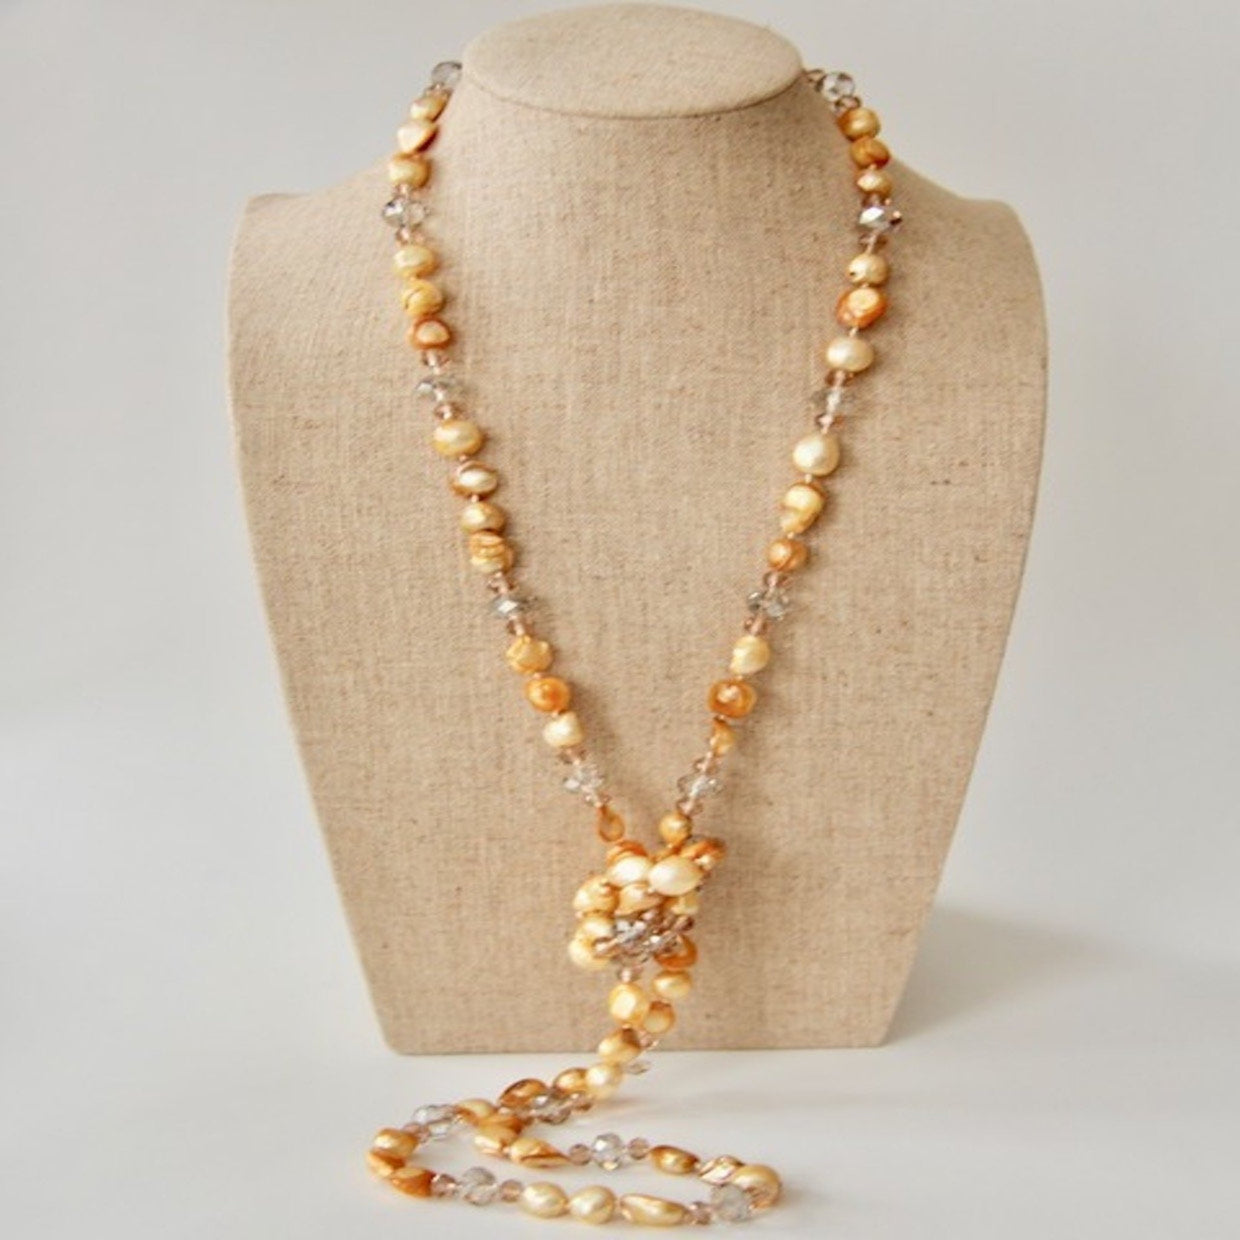 Freshwater Pearl 6-Strand Necklace - Garden Party Collection Vintage Jewelry